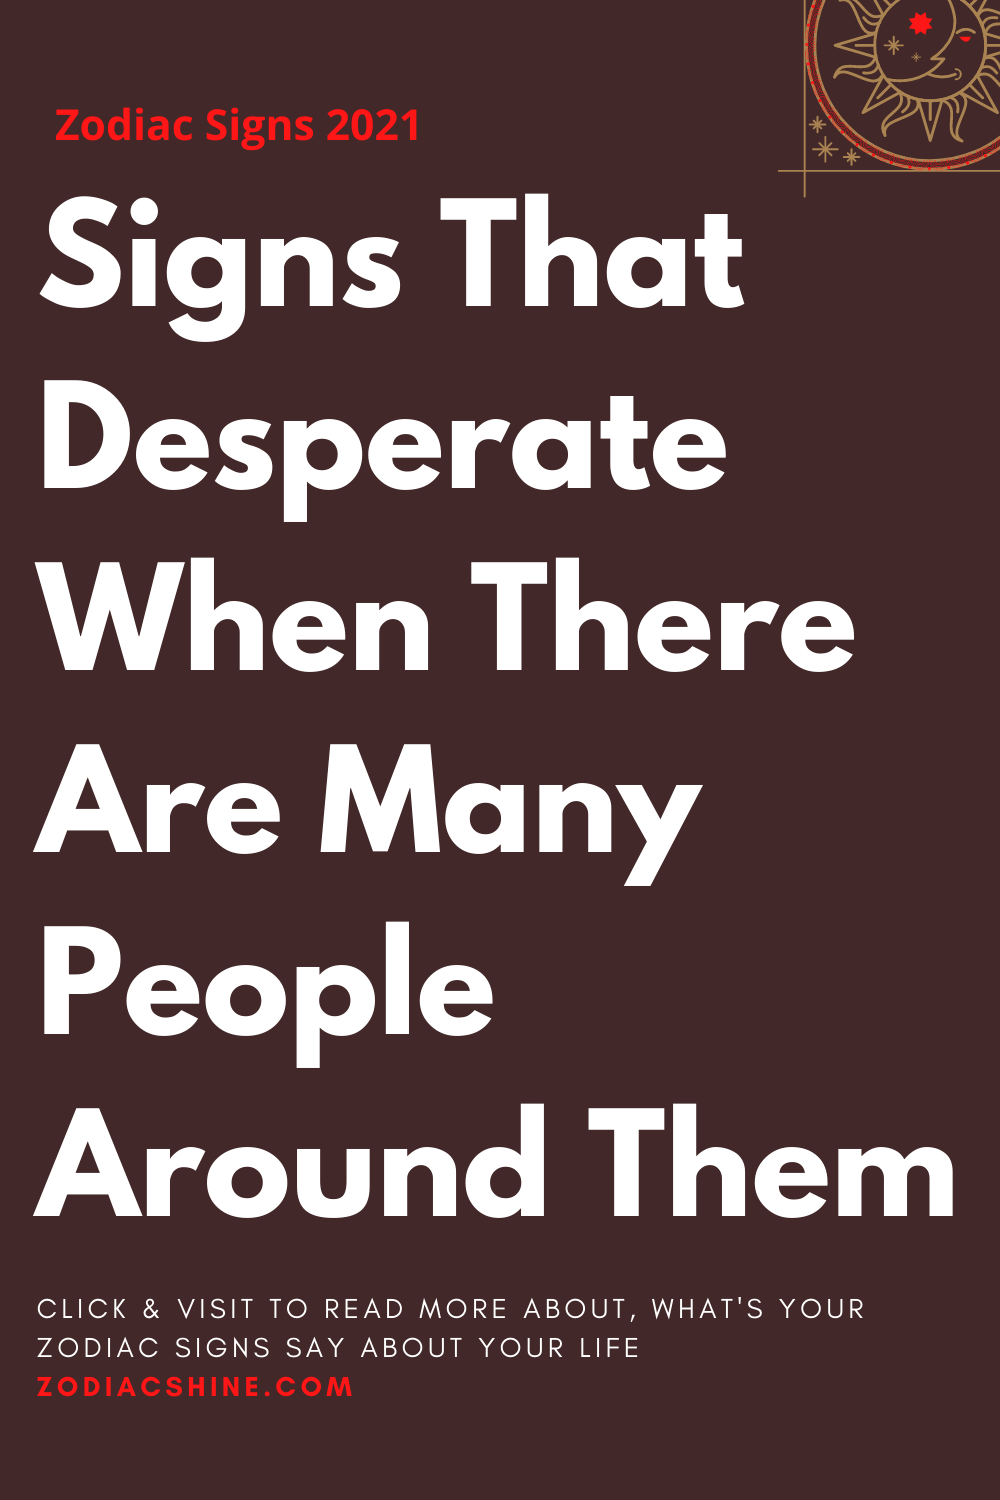 Signs That Desperate When There Are Many People Around Them